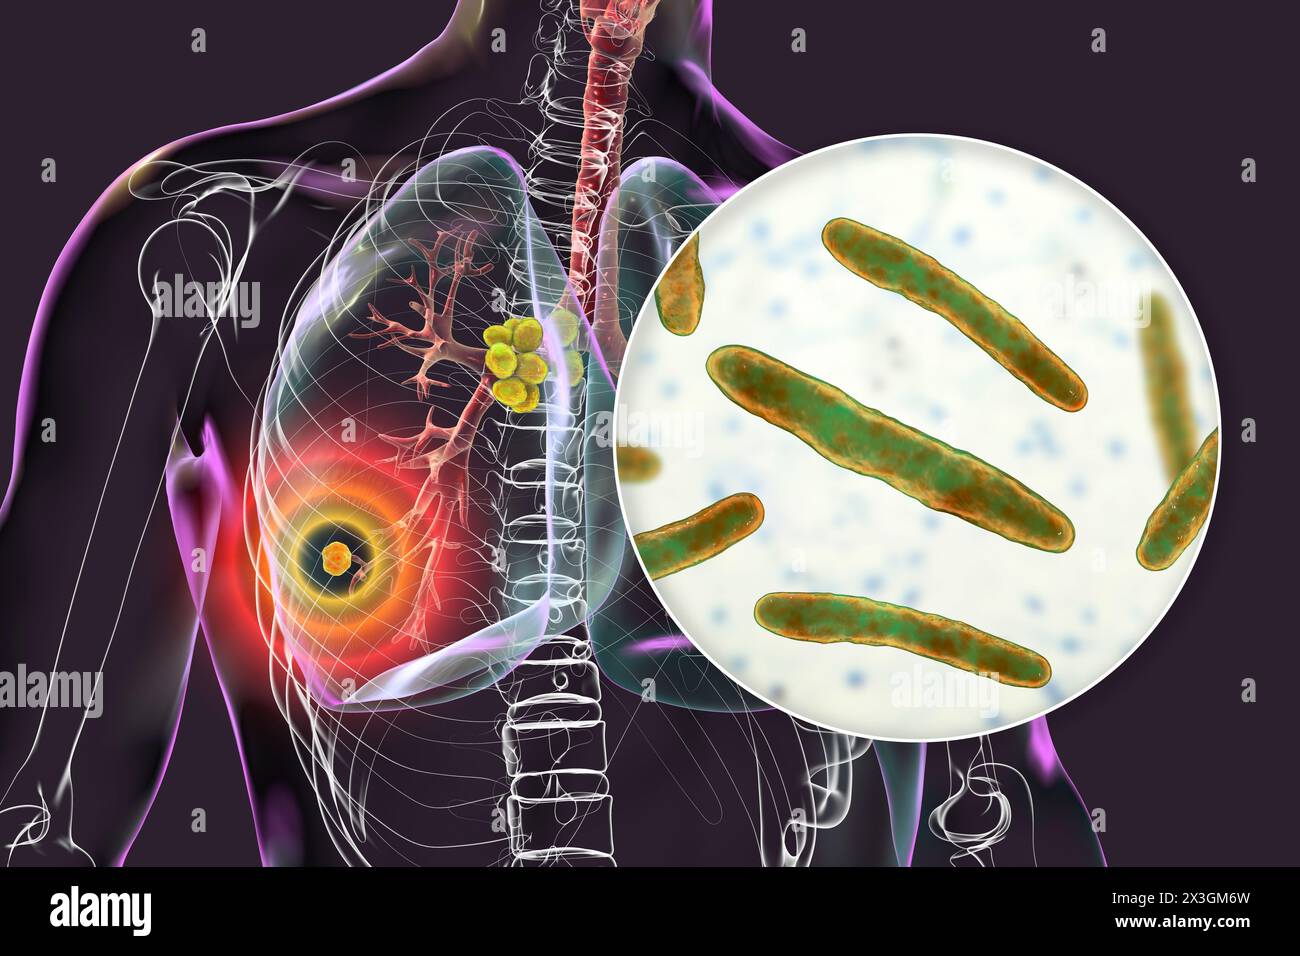 Illustration of primary lung tuberculosis, featuring the Ghon complex and mediastinal lymphadenitis with close-up view of Mycobacterium tuberculosis bacteria. Stock Photo